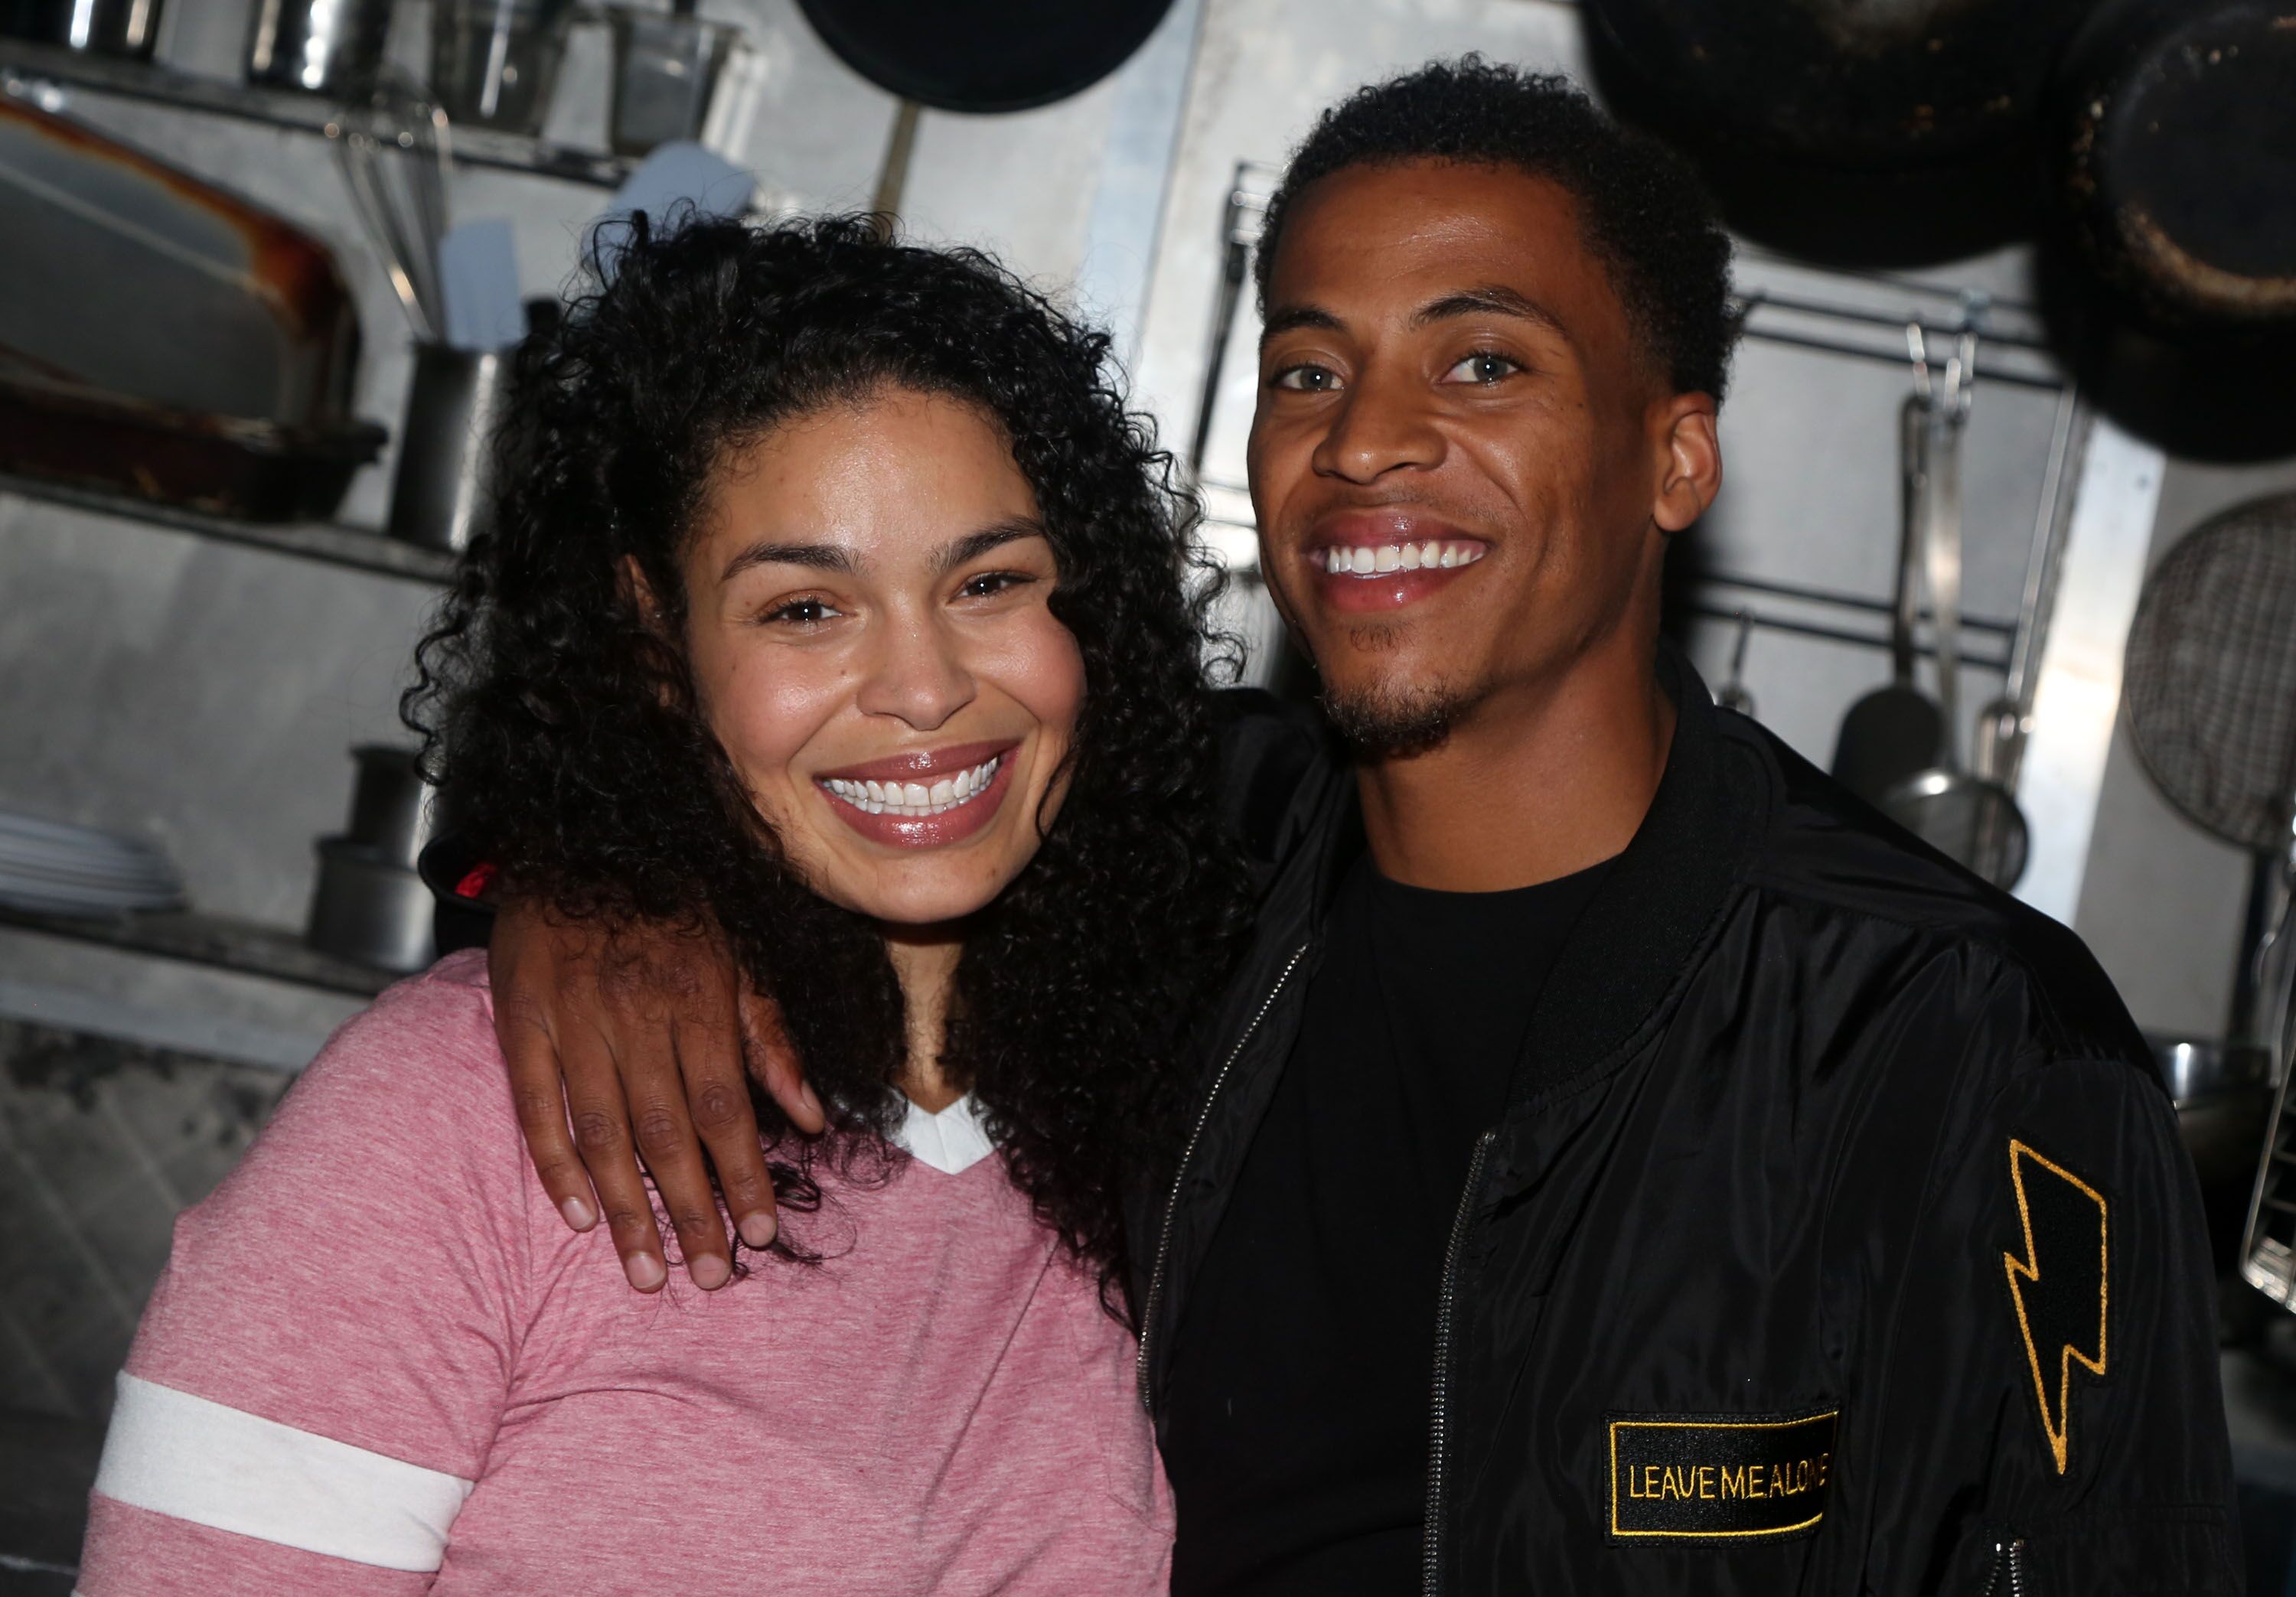 Jordin Sparks and Dana Isaiah pose backstage as Sparks joins the cast of "Waitress" on Broadway at The Brooks Atkinson Theatre on September 16, 2019 in New York City. | Source: Getty Images